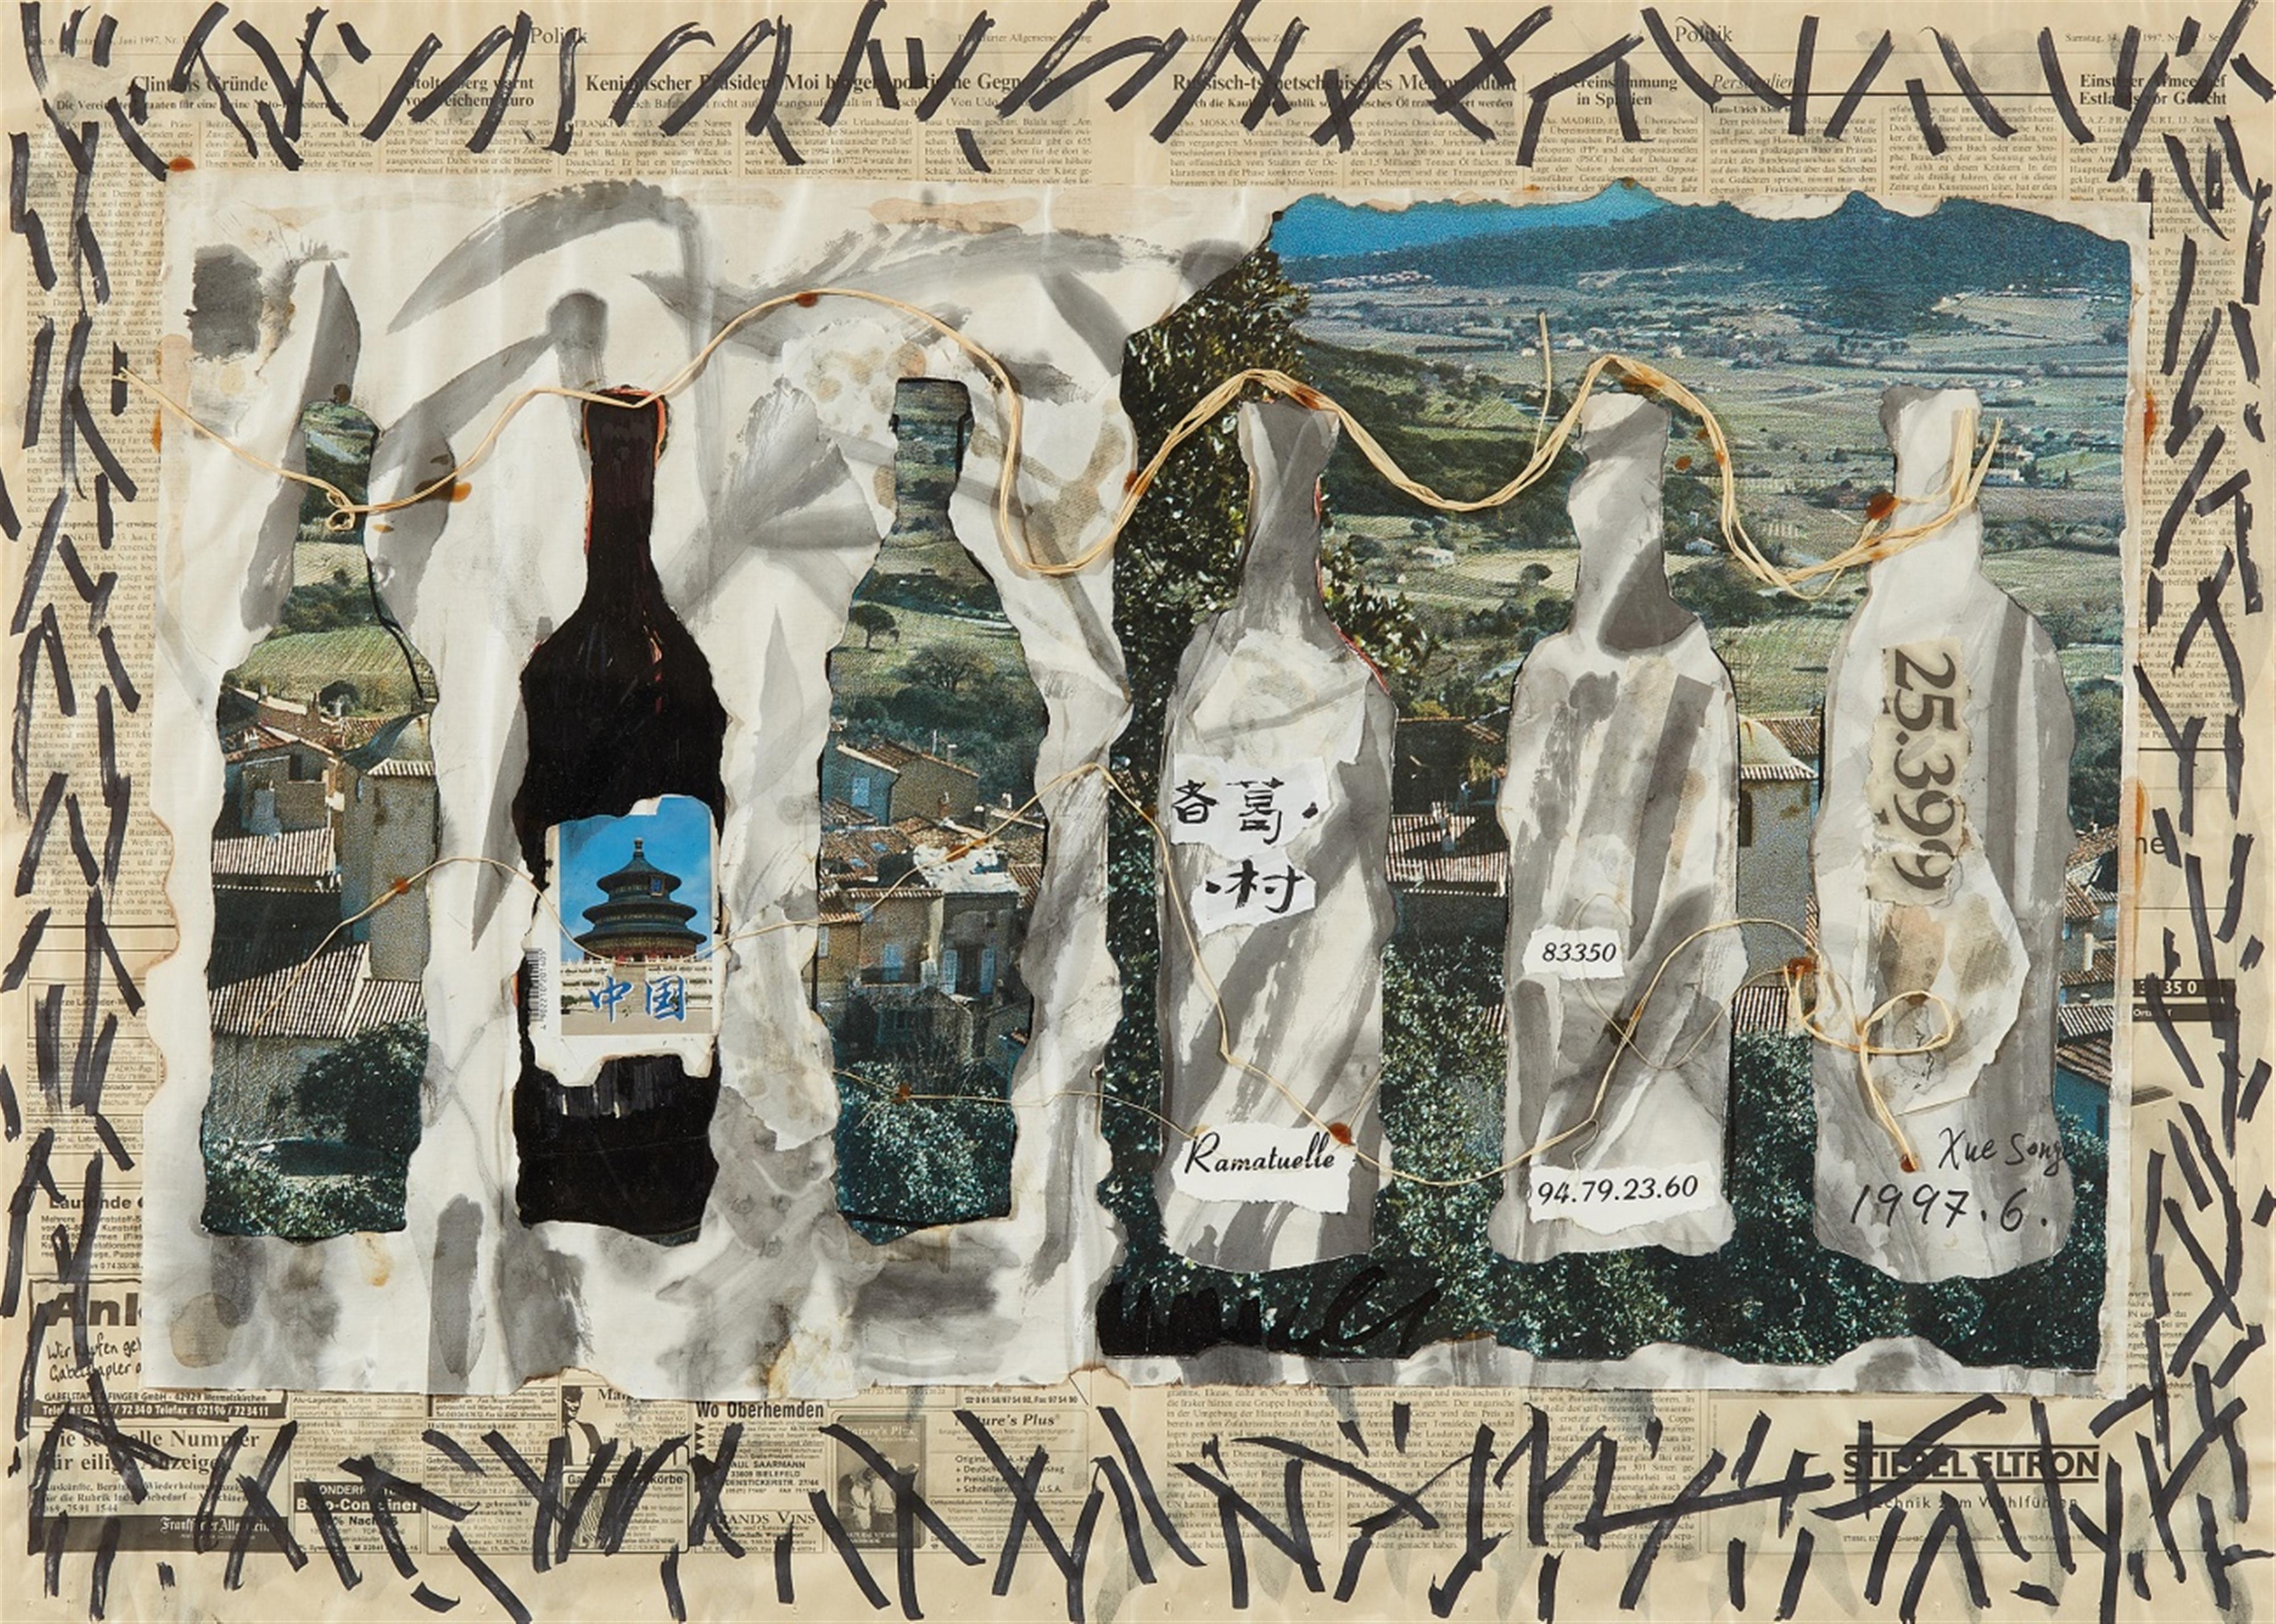 Xue Song . 1997 - Bottles. Mixed media and ink on paper. Signed and dated Xue Song, 1997.6. Framed and glazed. - image-1